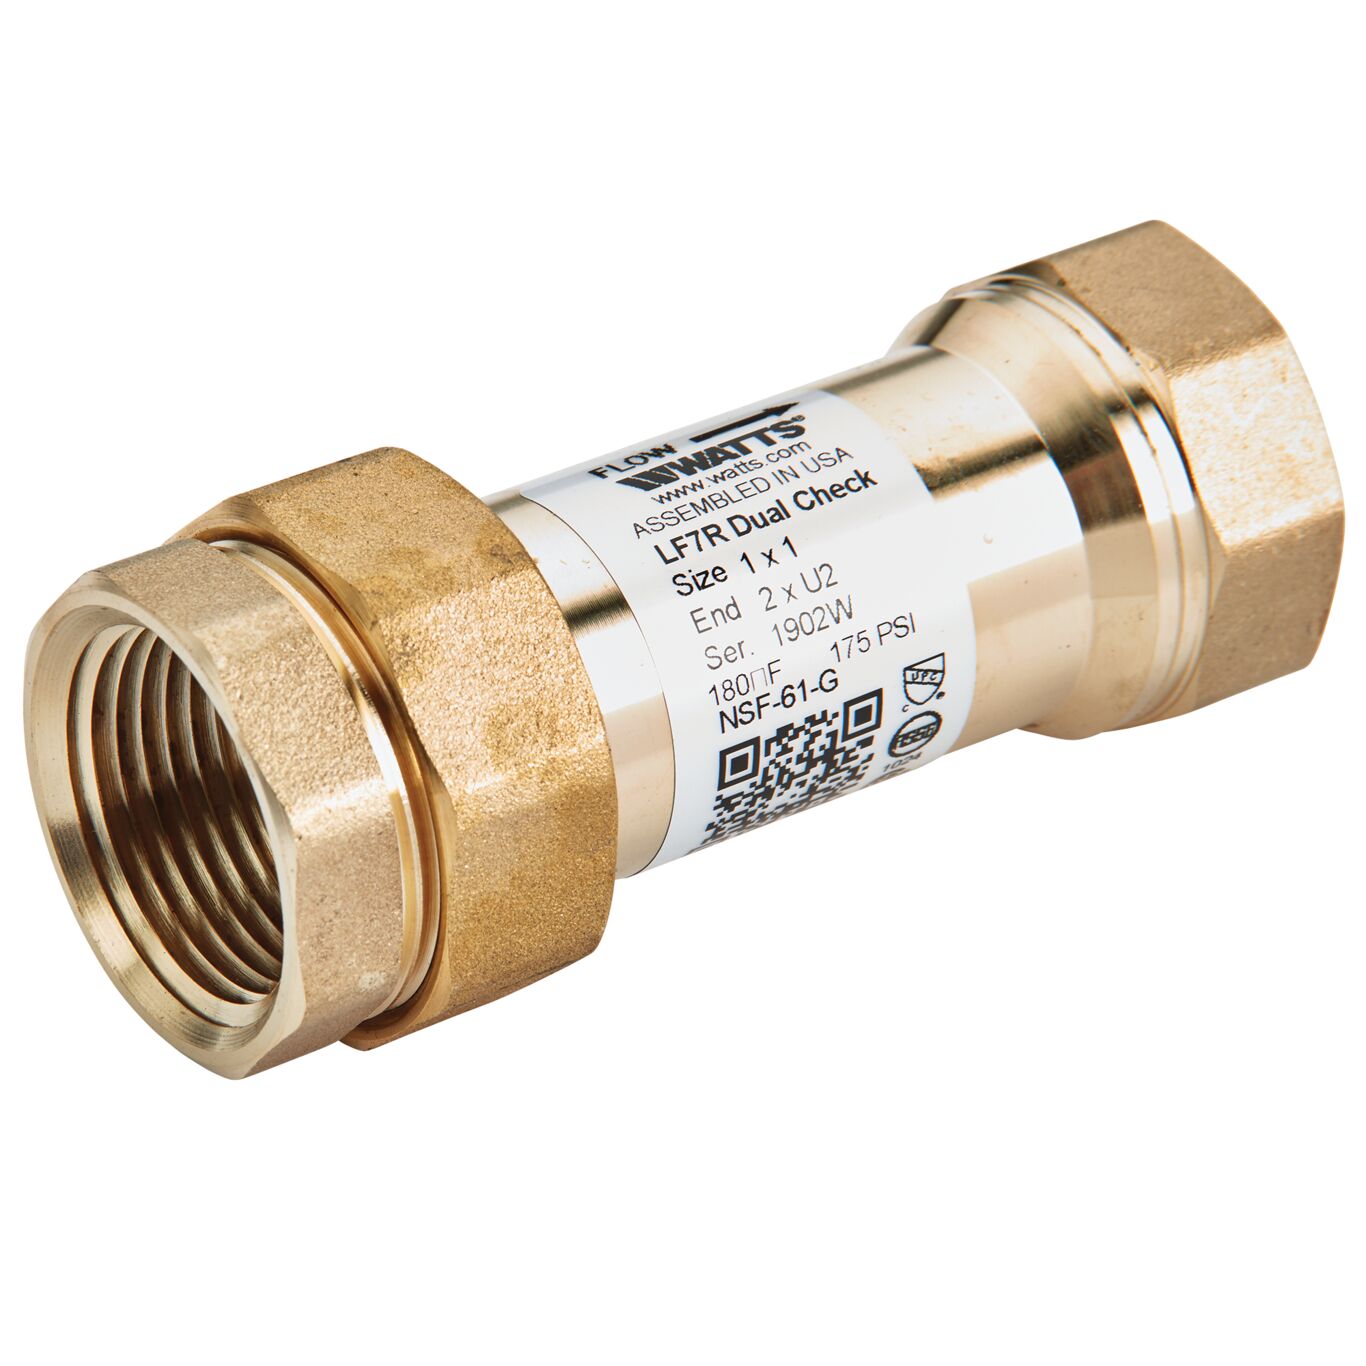 Proudct image 1 1/4 X 1 In Lead Free Dual Check Valve, Female Meter Thread Swivel Inlet X Union Male Npt Outlet